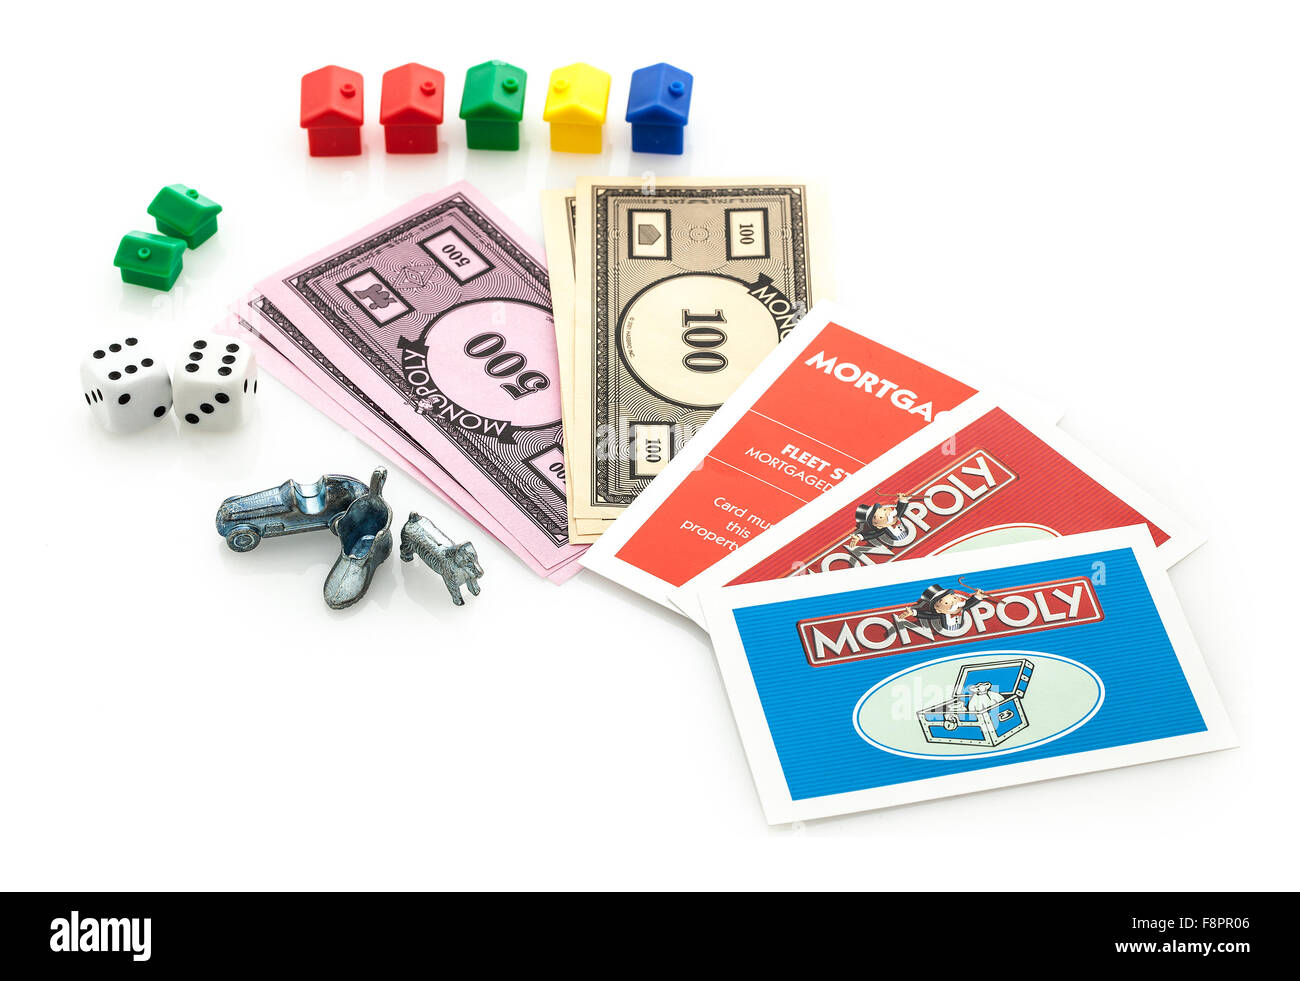 Monopoly board game showing Money, Cards, Houses, Hotels, Dice and Markers Stock Photo